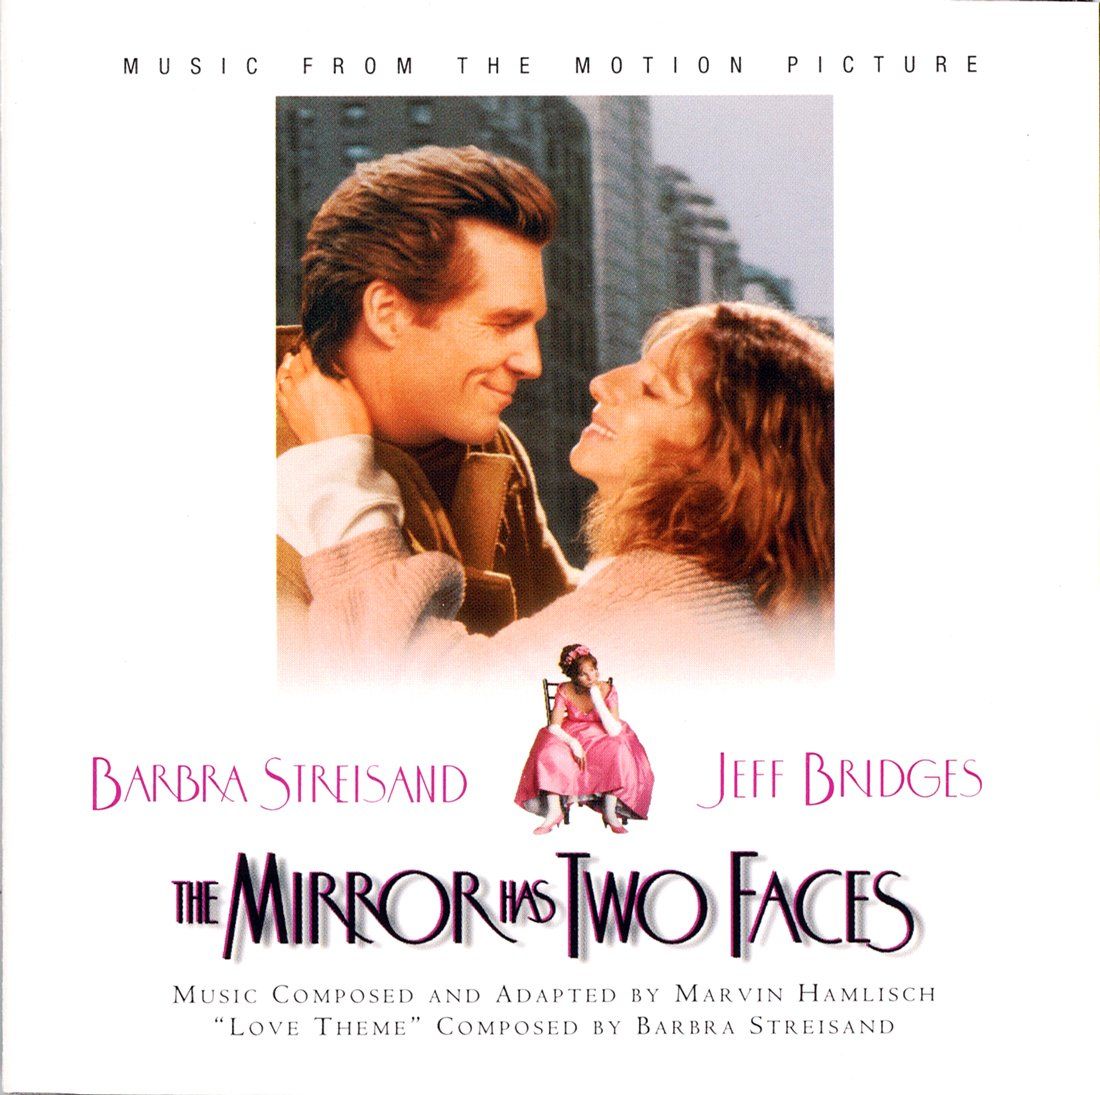 The Mirror Has Two Faces CD cover